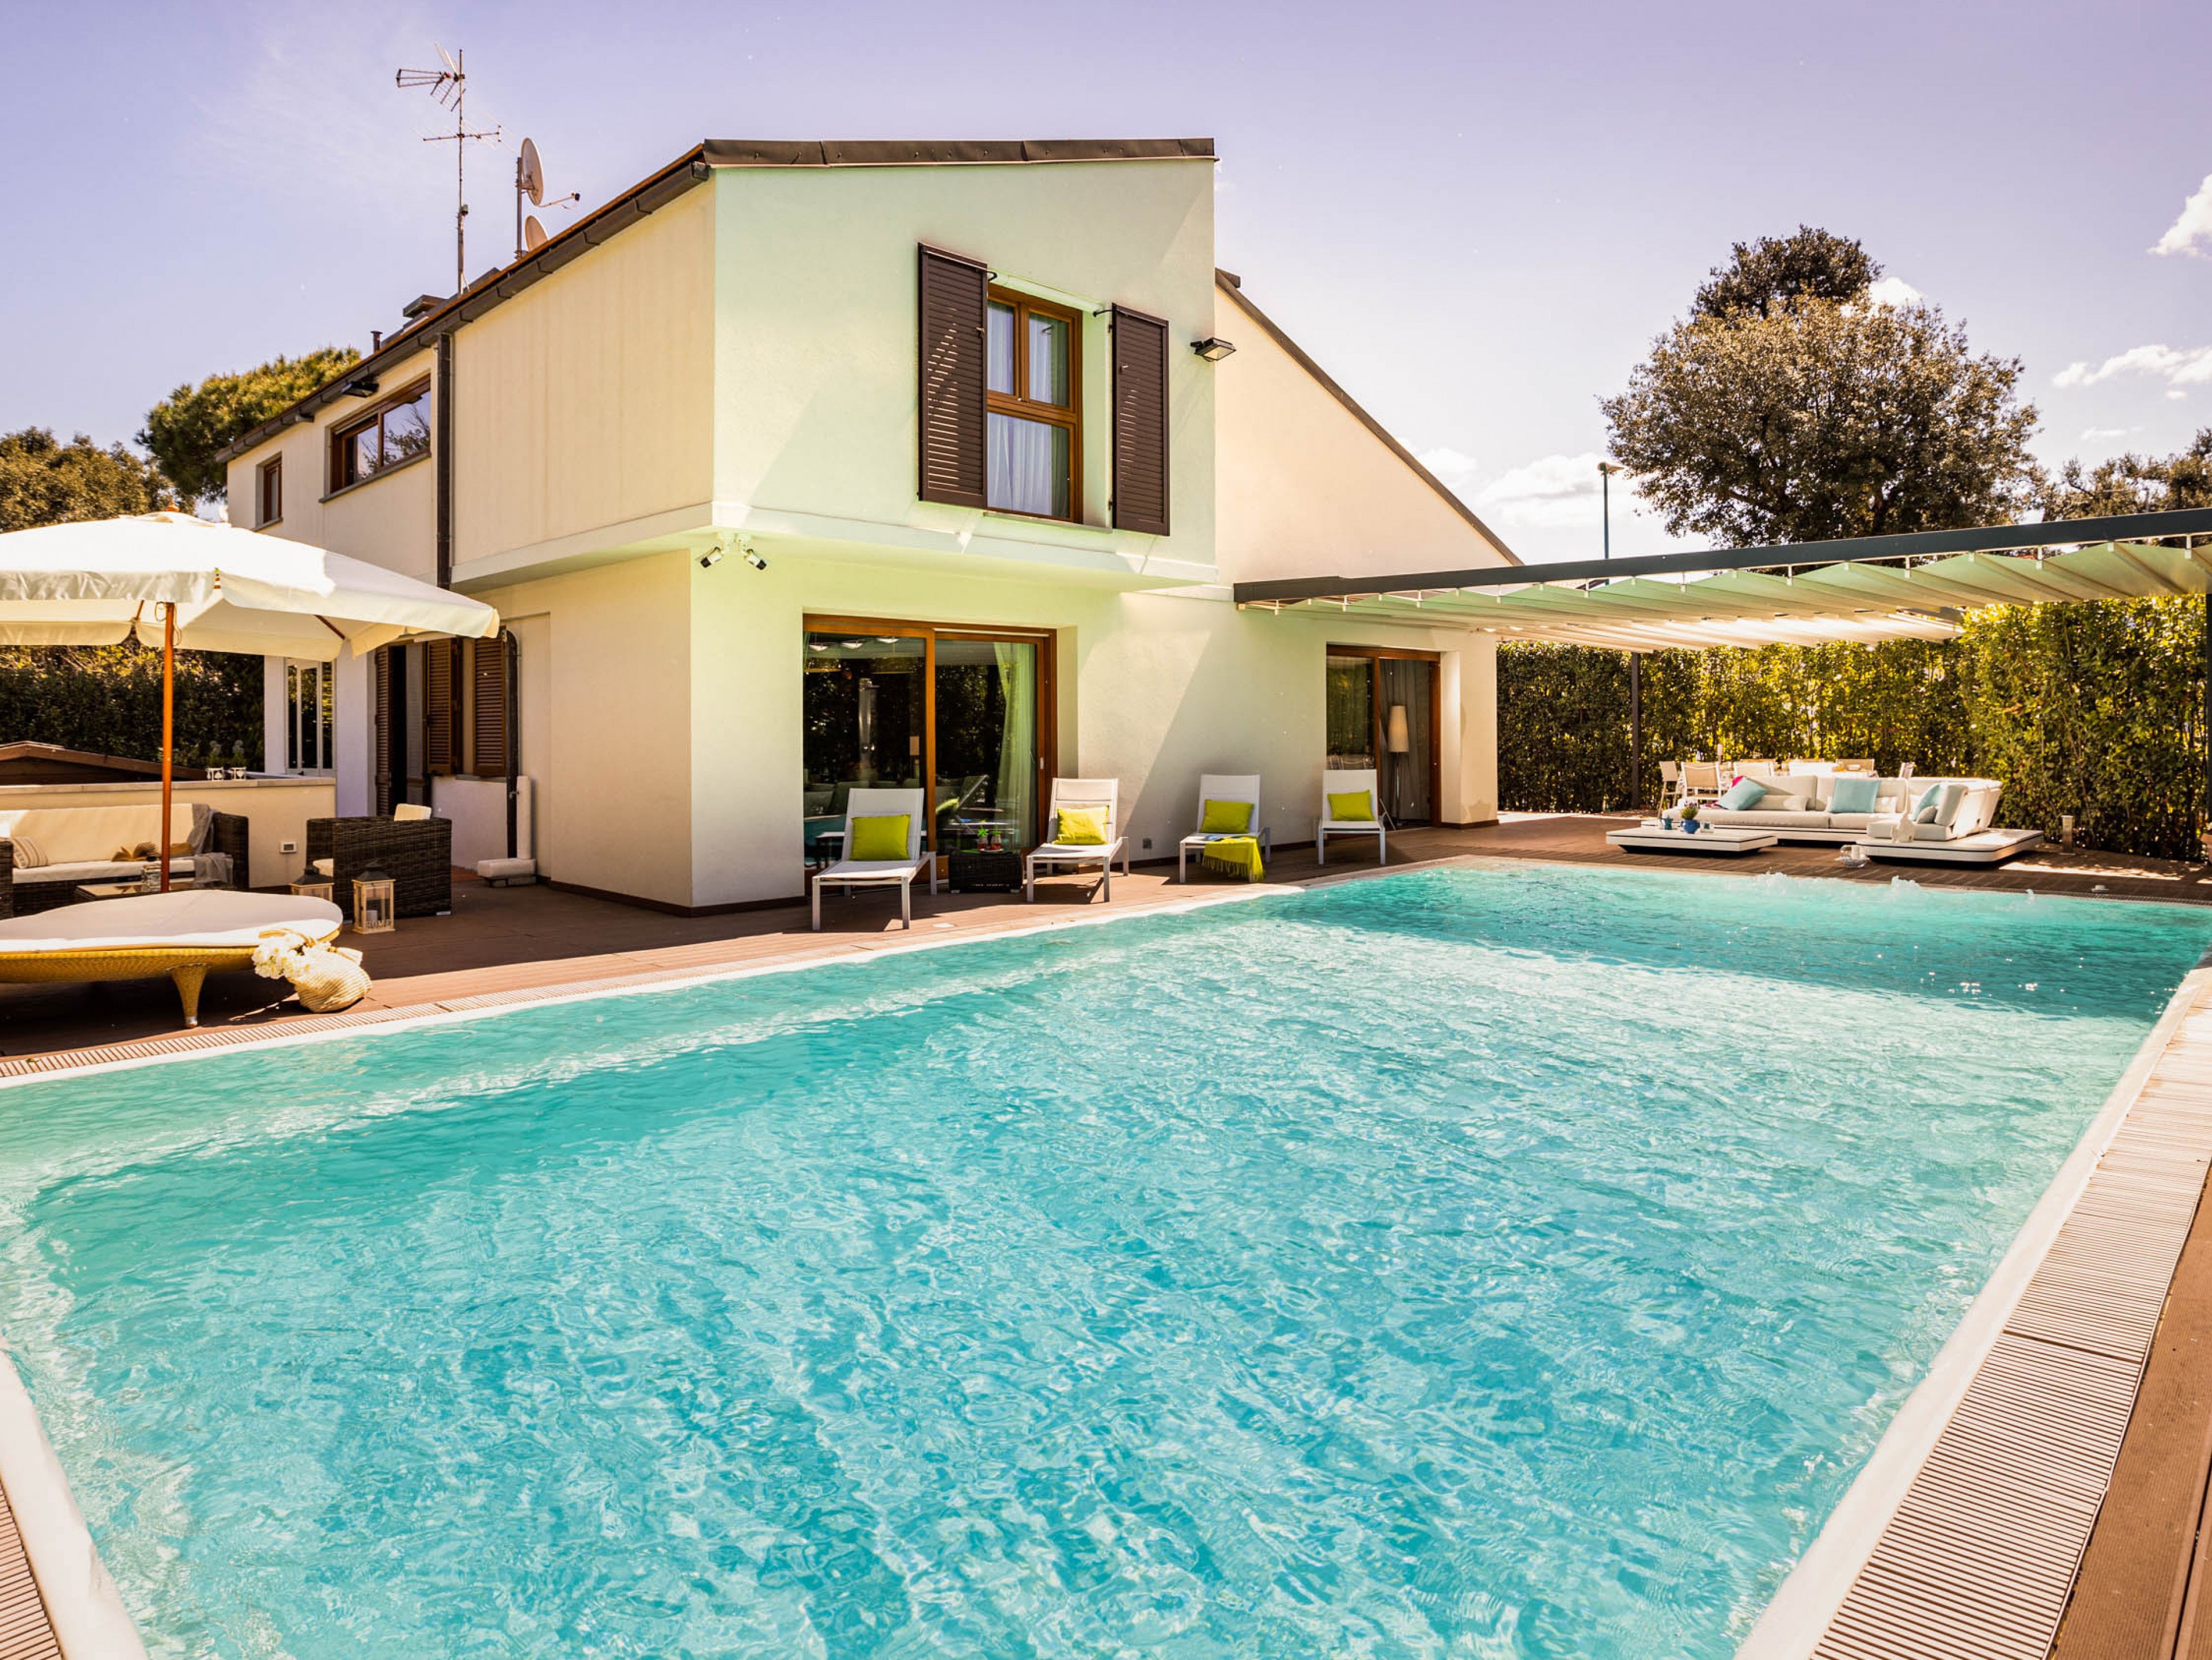 Villa Amace - Pisa holiday rentals with private pools